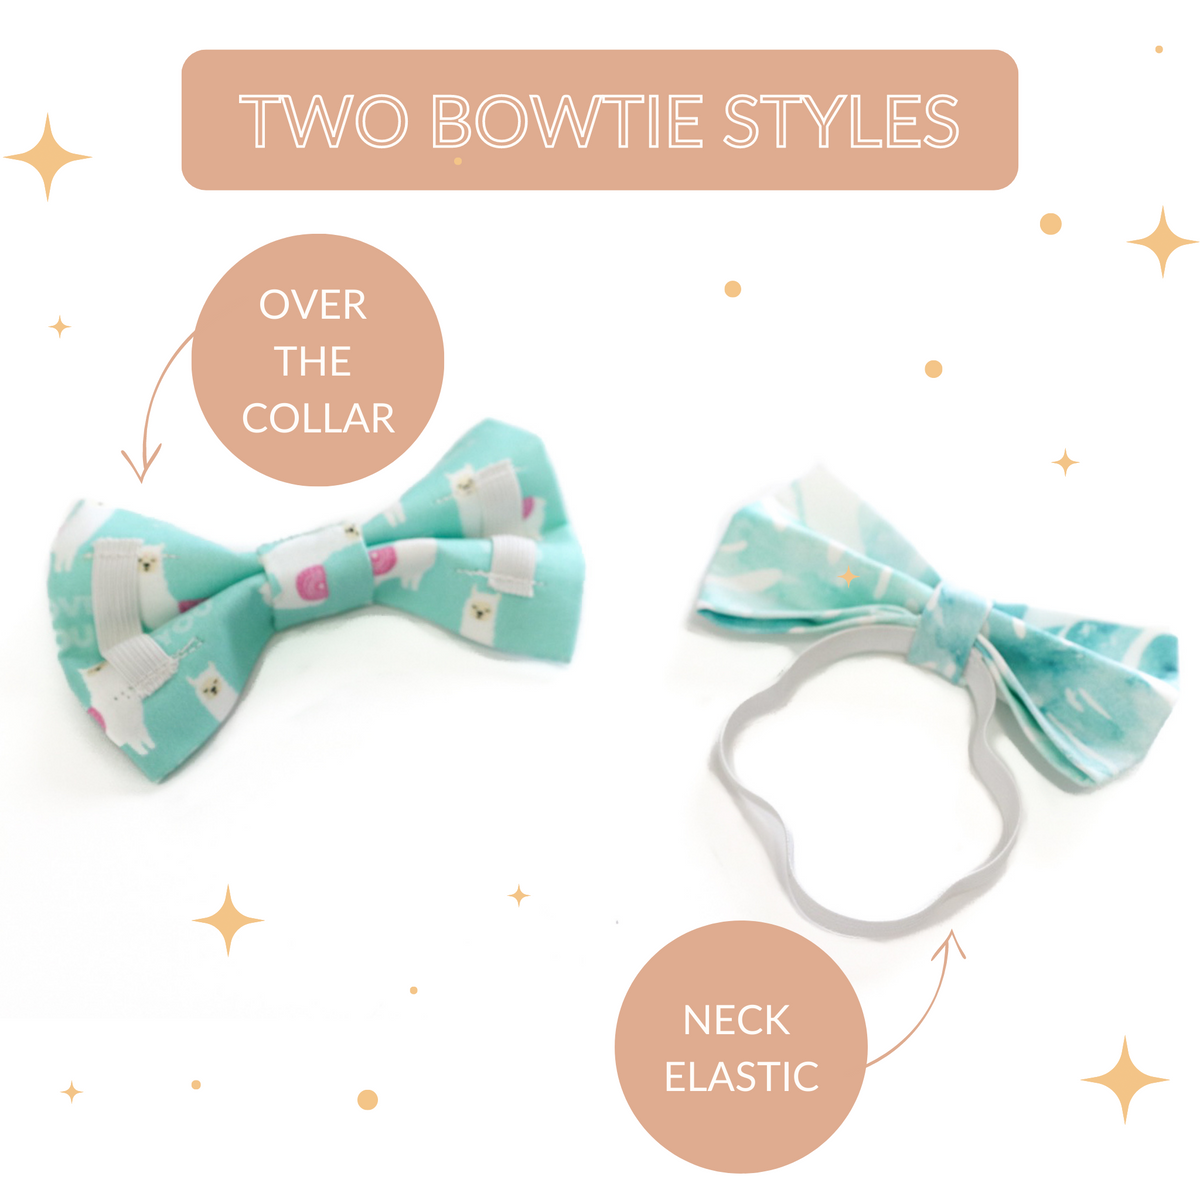 pet bowtie styles over the collar or neck elastic